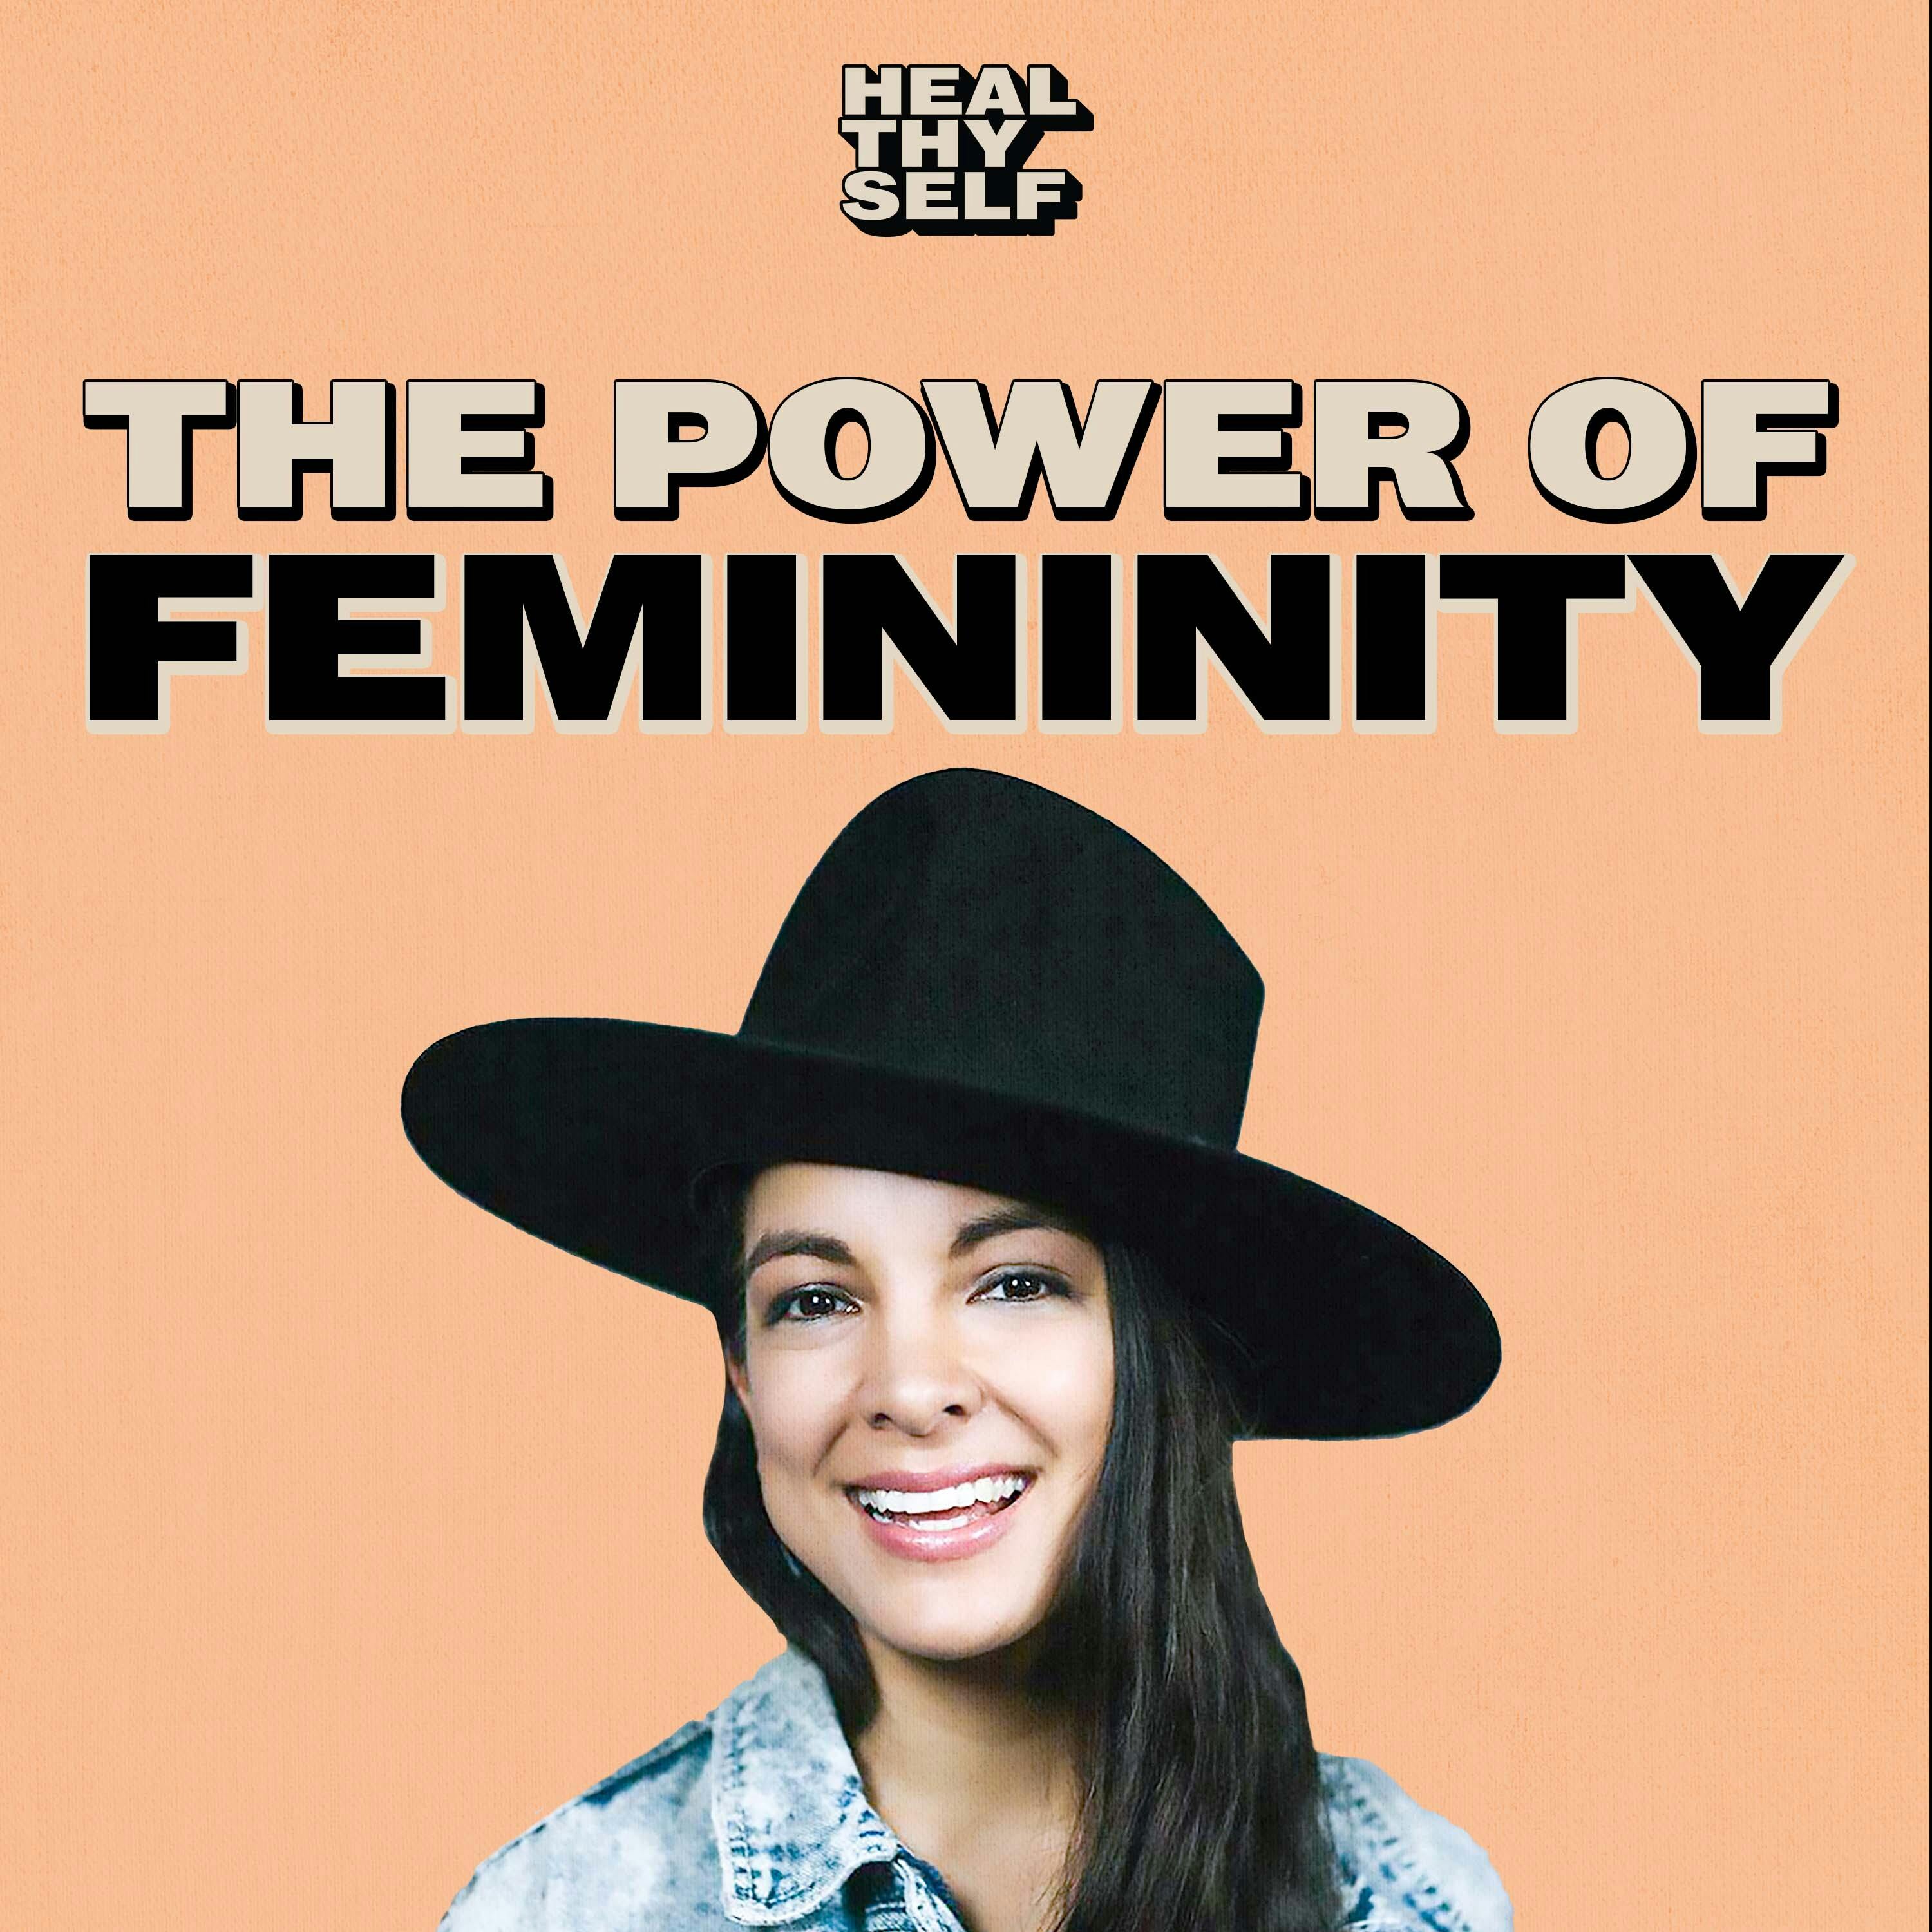 My trip to the Amazon, and Healthy Femininity & Business and Relationships with Miki Agrawal